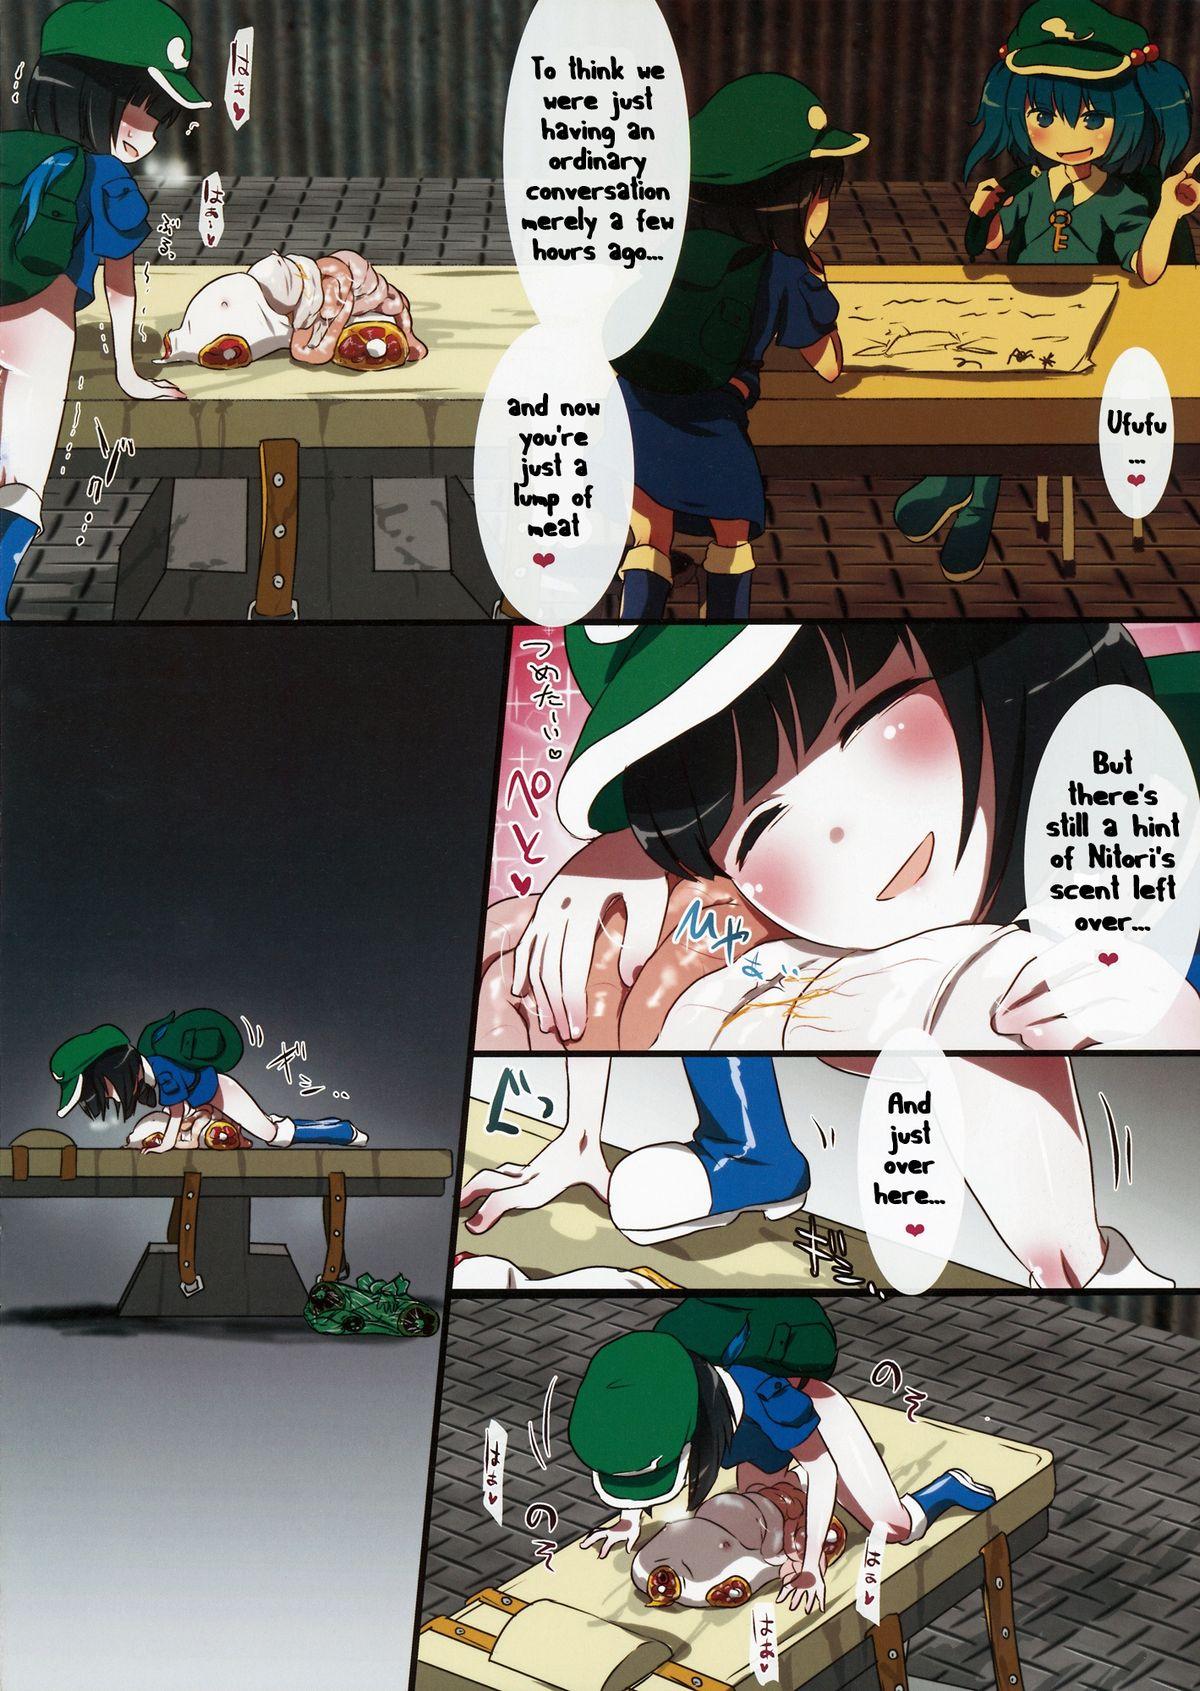 Body 0210564801 - Touhou project Highschool - Page 10